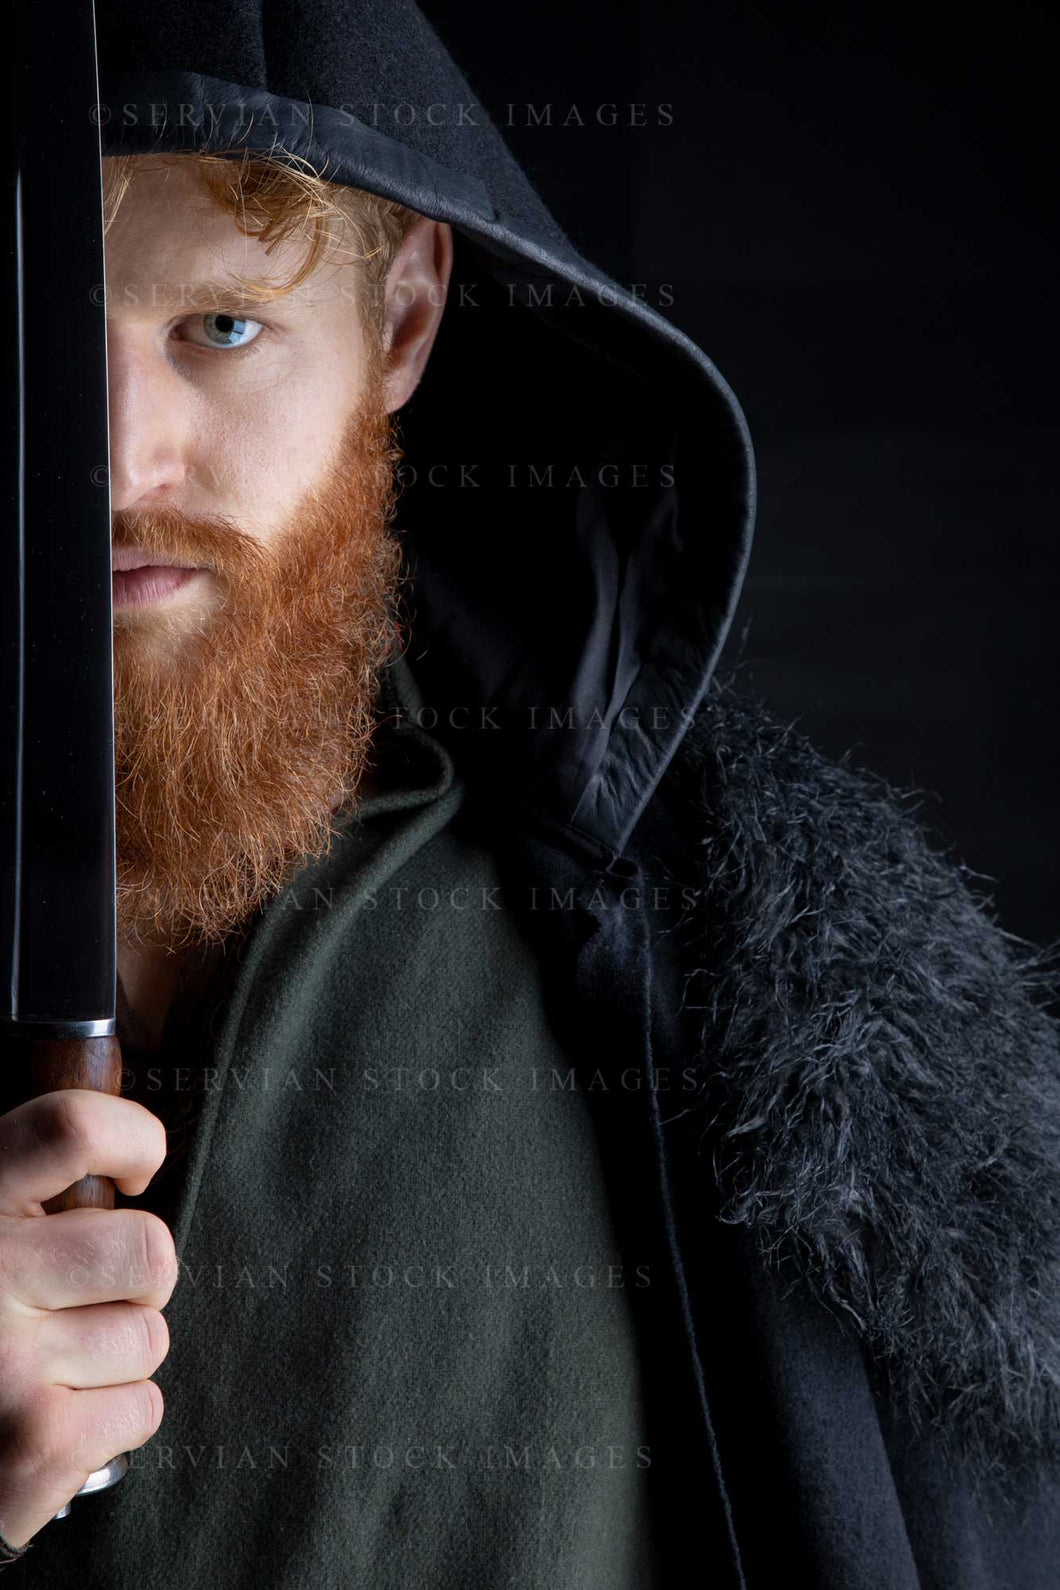 Viking or high fantasy man with red hair and beard wearing a black cloak and carrying a sword against a black backdrop (Luke 3192)